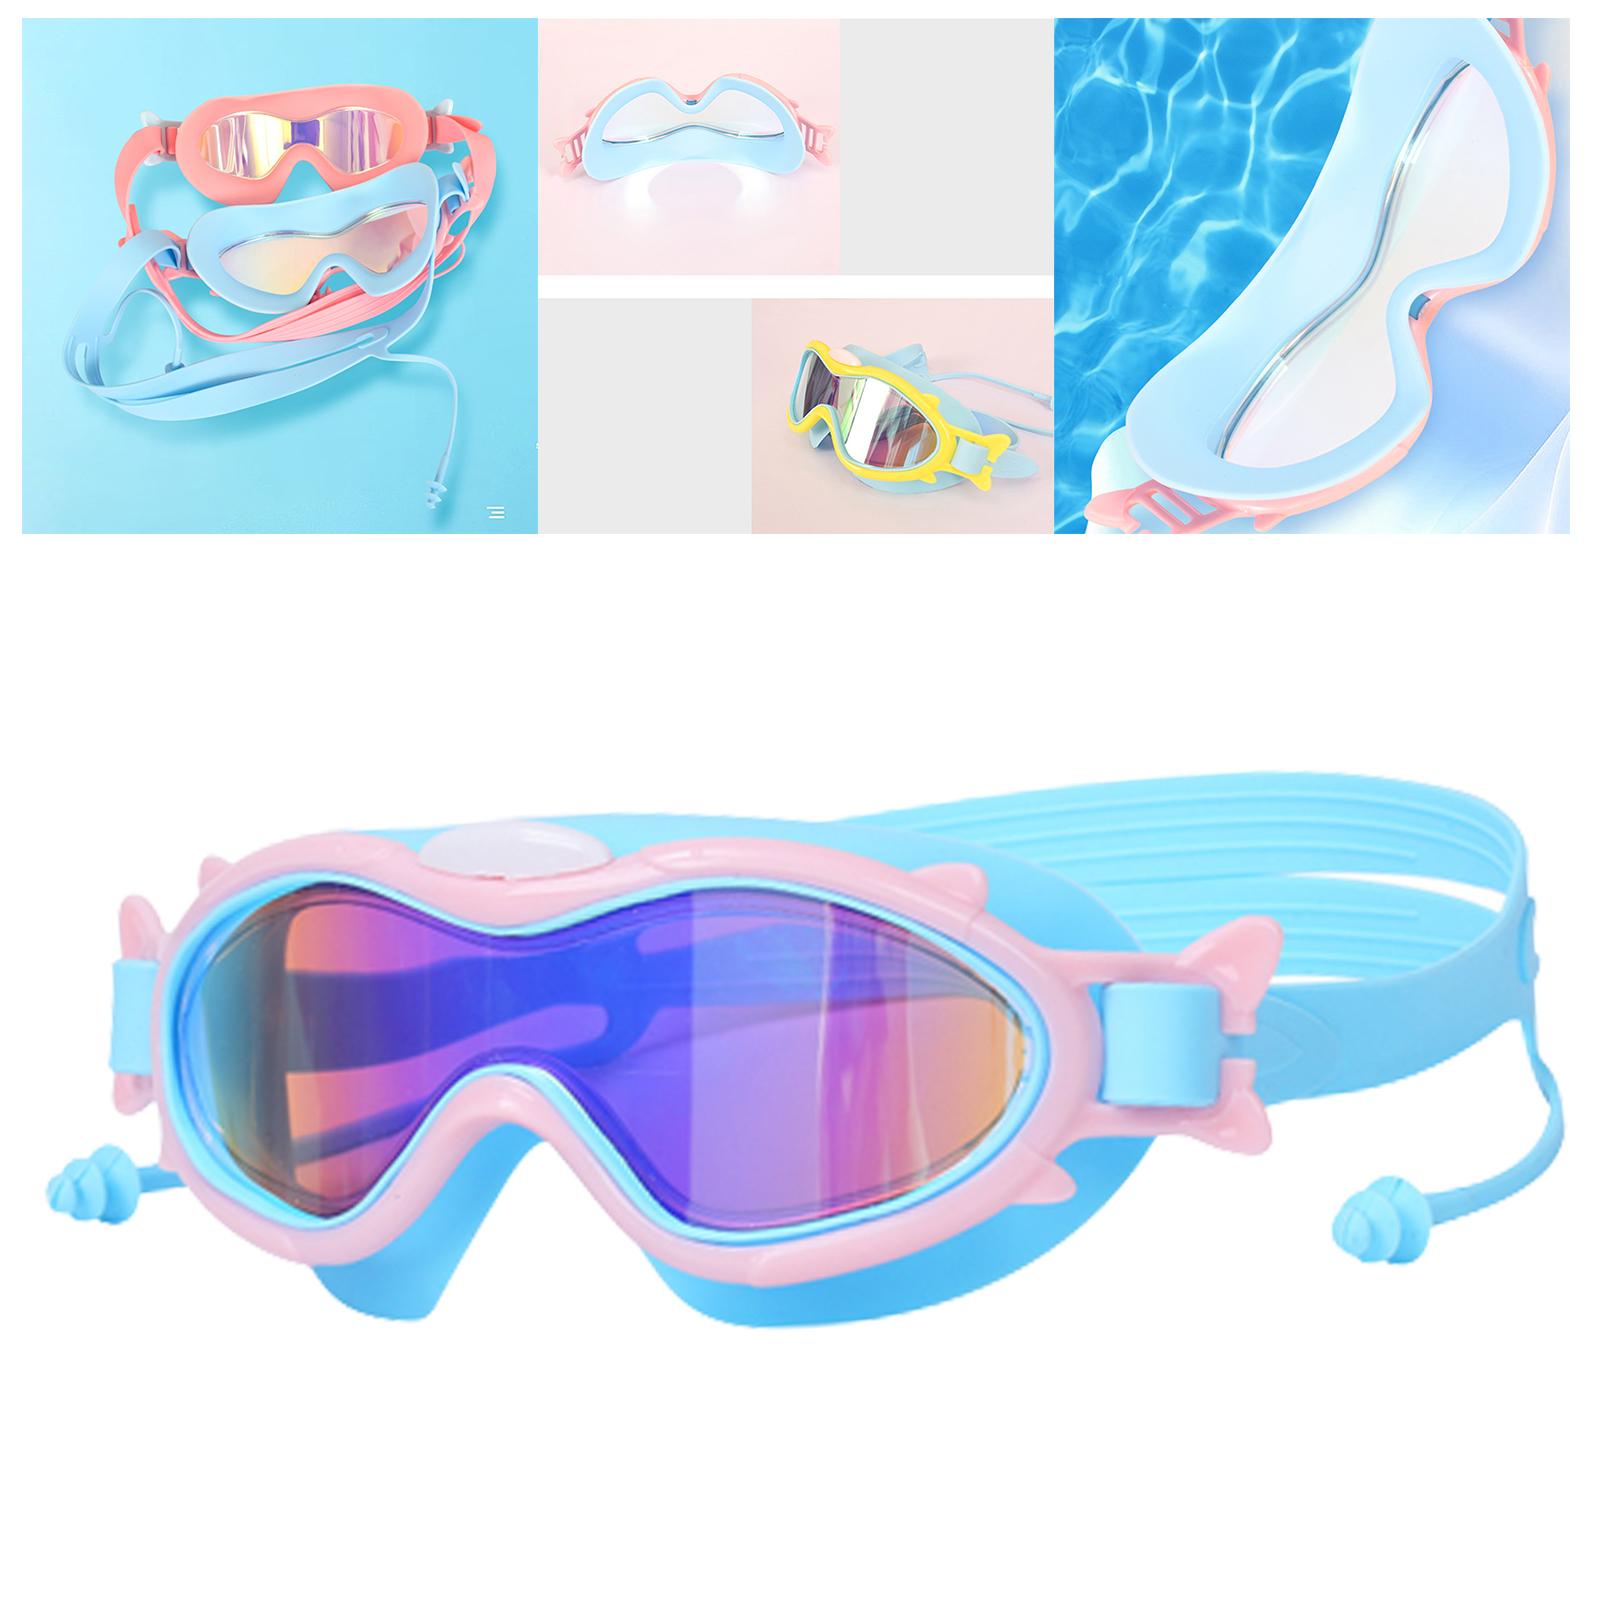 Kids Swimming Goggles with Ear Plugs Swim Goggles for Kids 6-14 Boys Girls Blue Pink